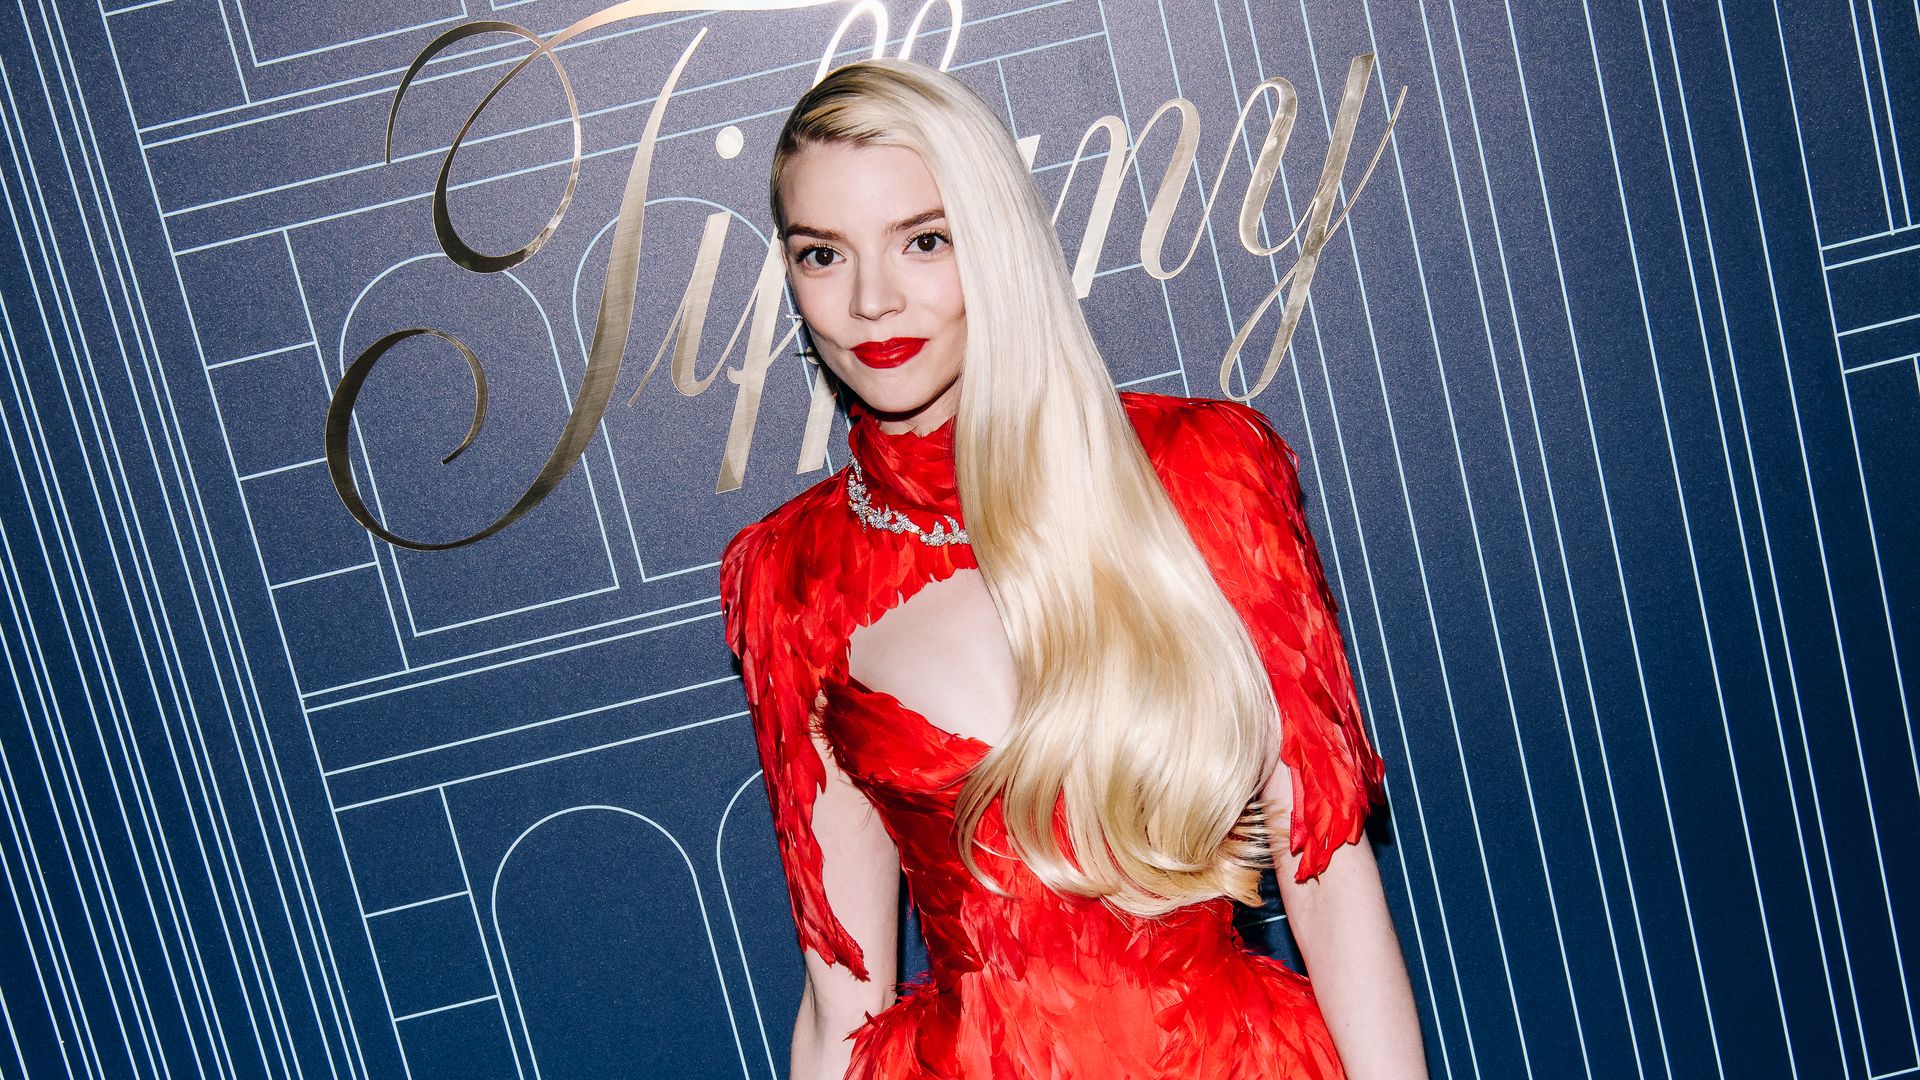 Florence Pugh, Anya Taylor-Joy, Hailey Bieber: All the incredible outfits from the Tiffany & Co party